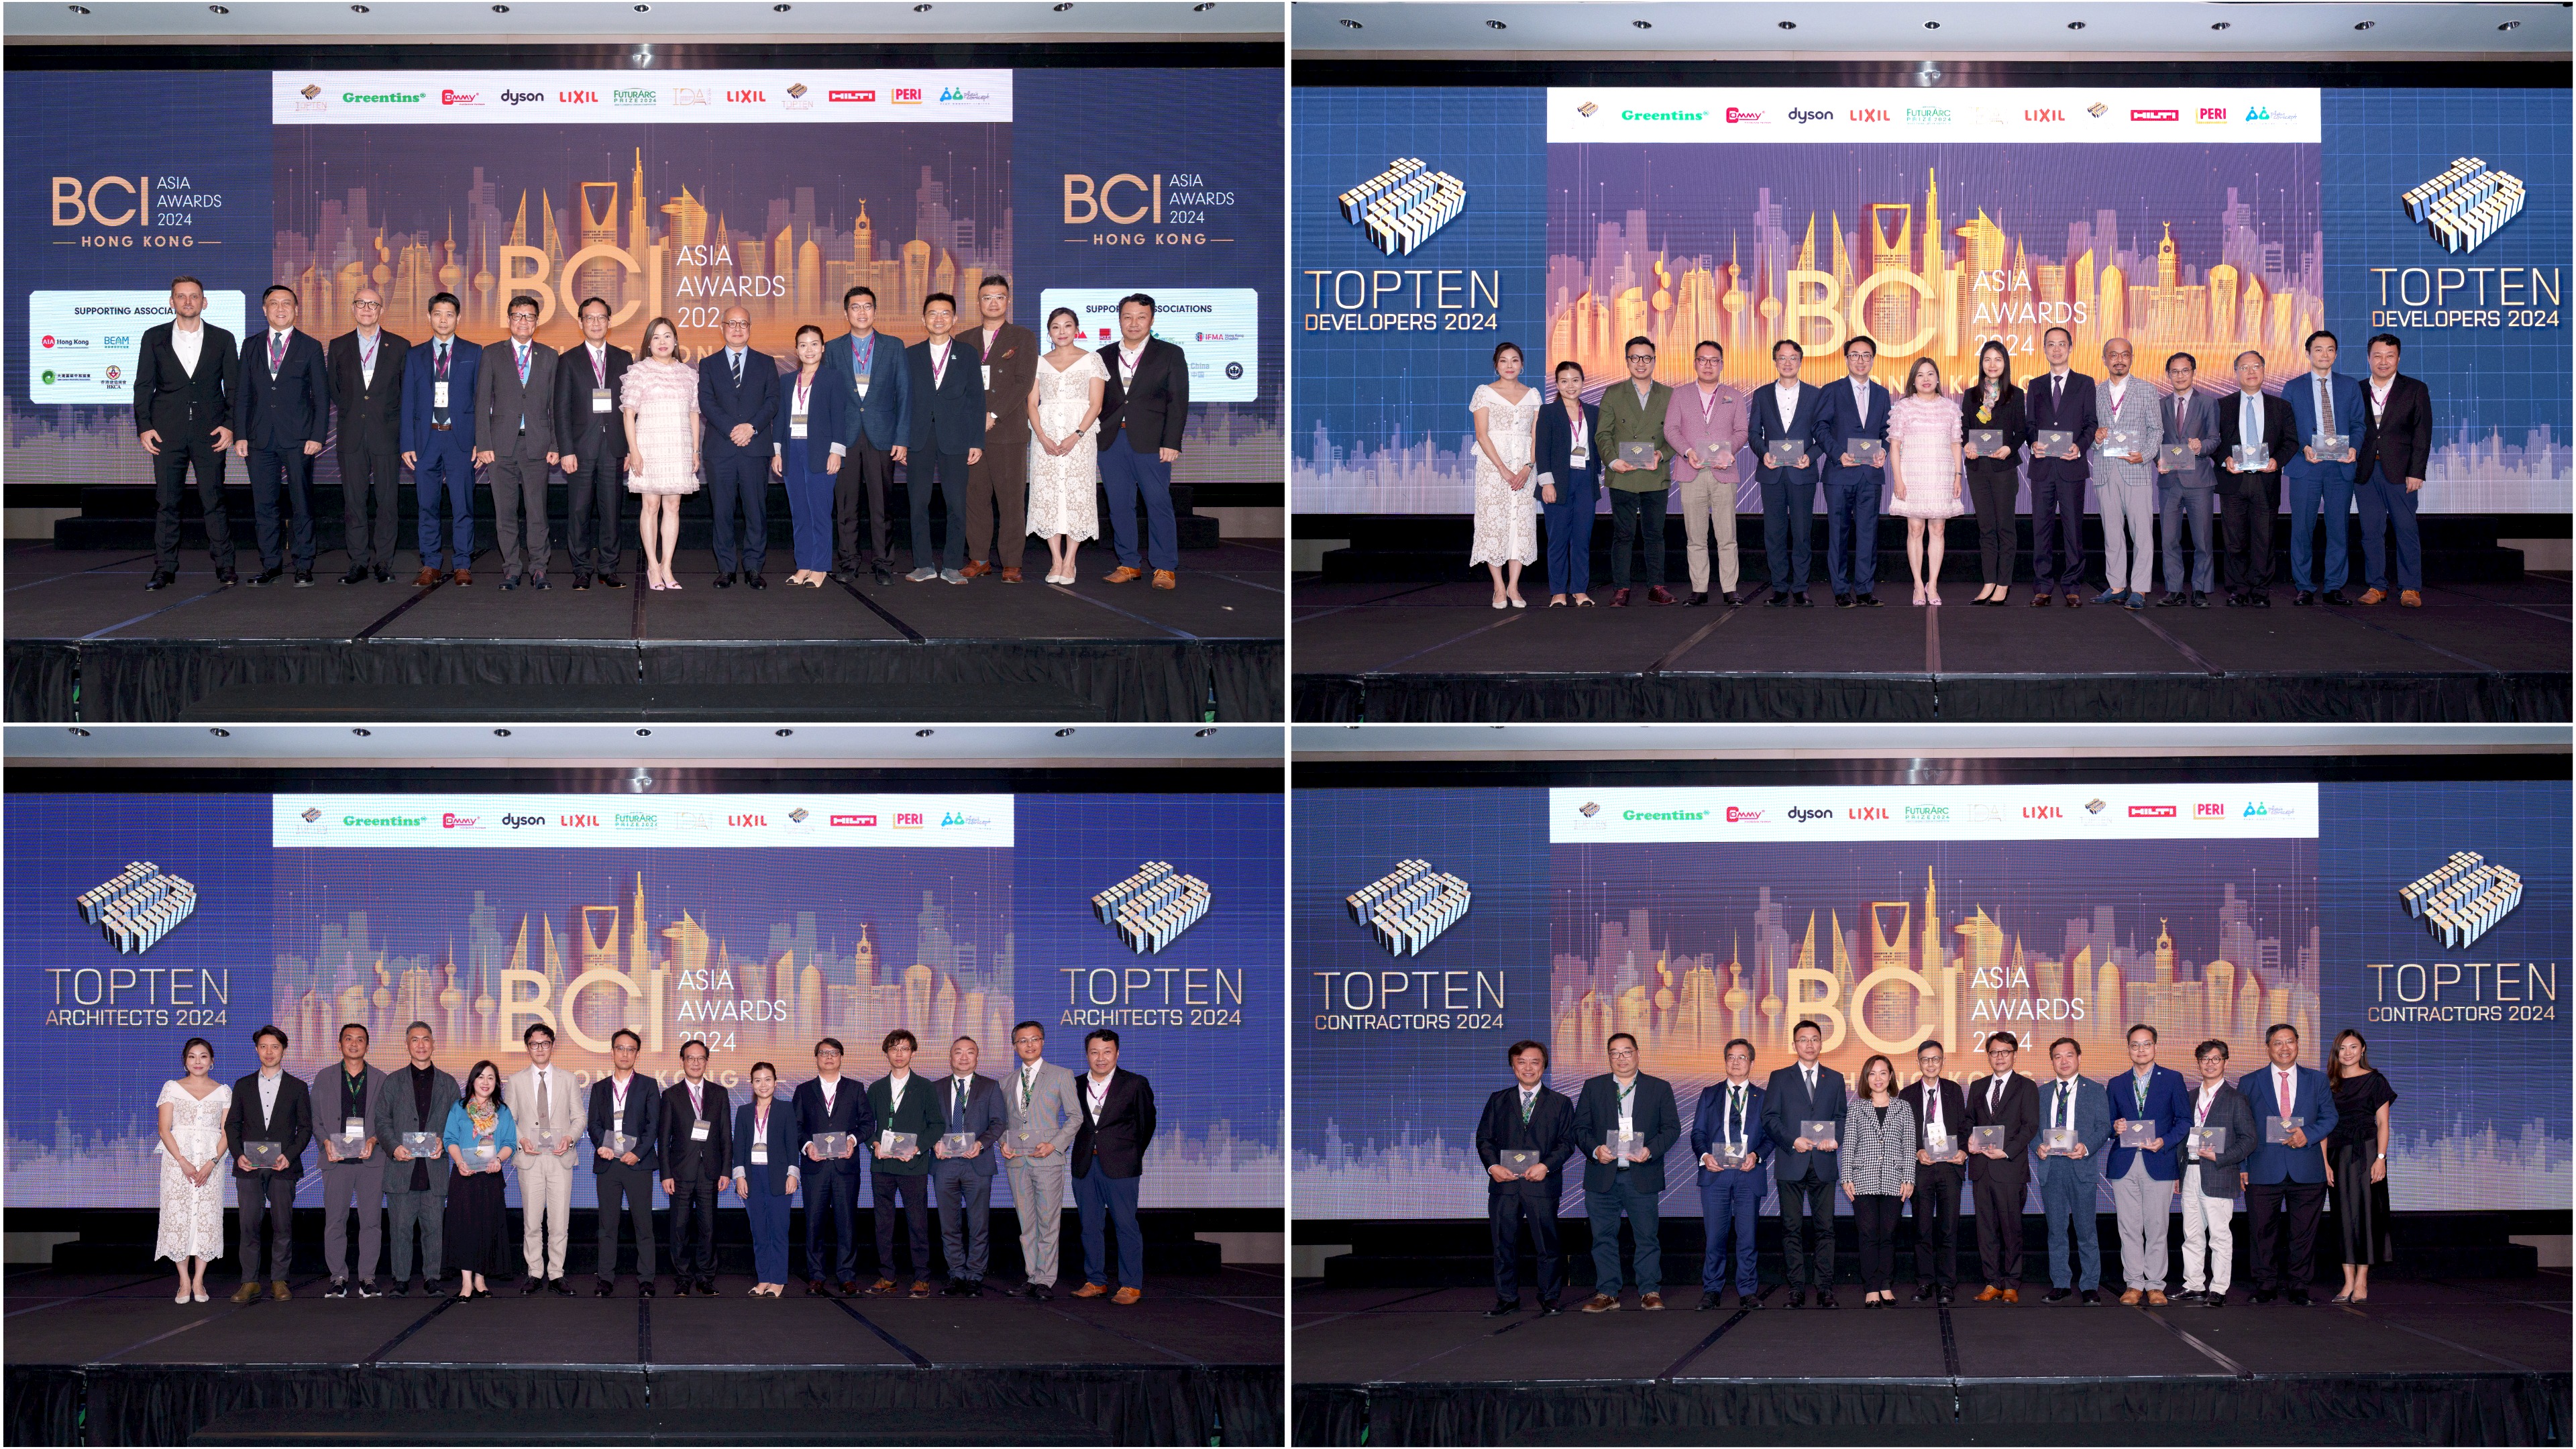 Top left: Guests of Honour at BCI Asia Awards ceremony, Top Right: BCI ASIA TOP 10 DEVELOPERS 2024, Bottom left: BCI ASIA TOP 10 ARCHITECTS 2024, Bottom Right: BCI ASIA TOP 10 CONTRACTORS 2024